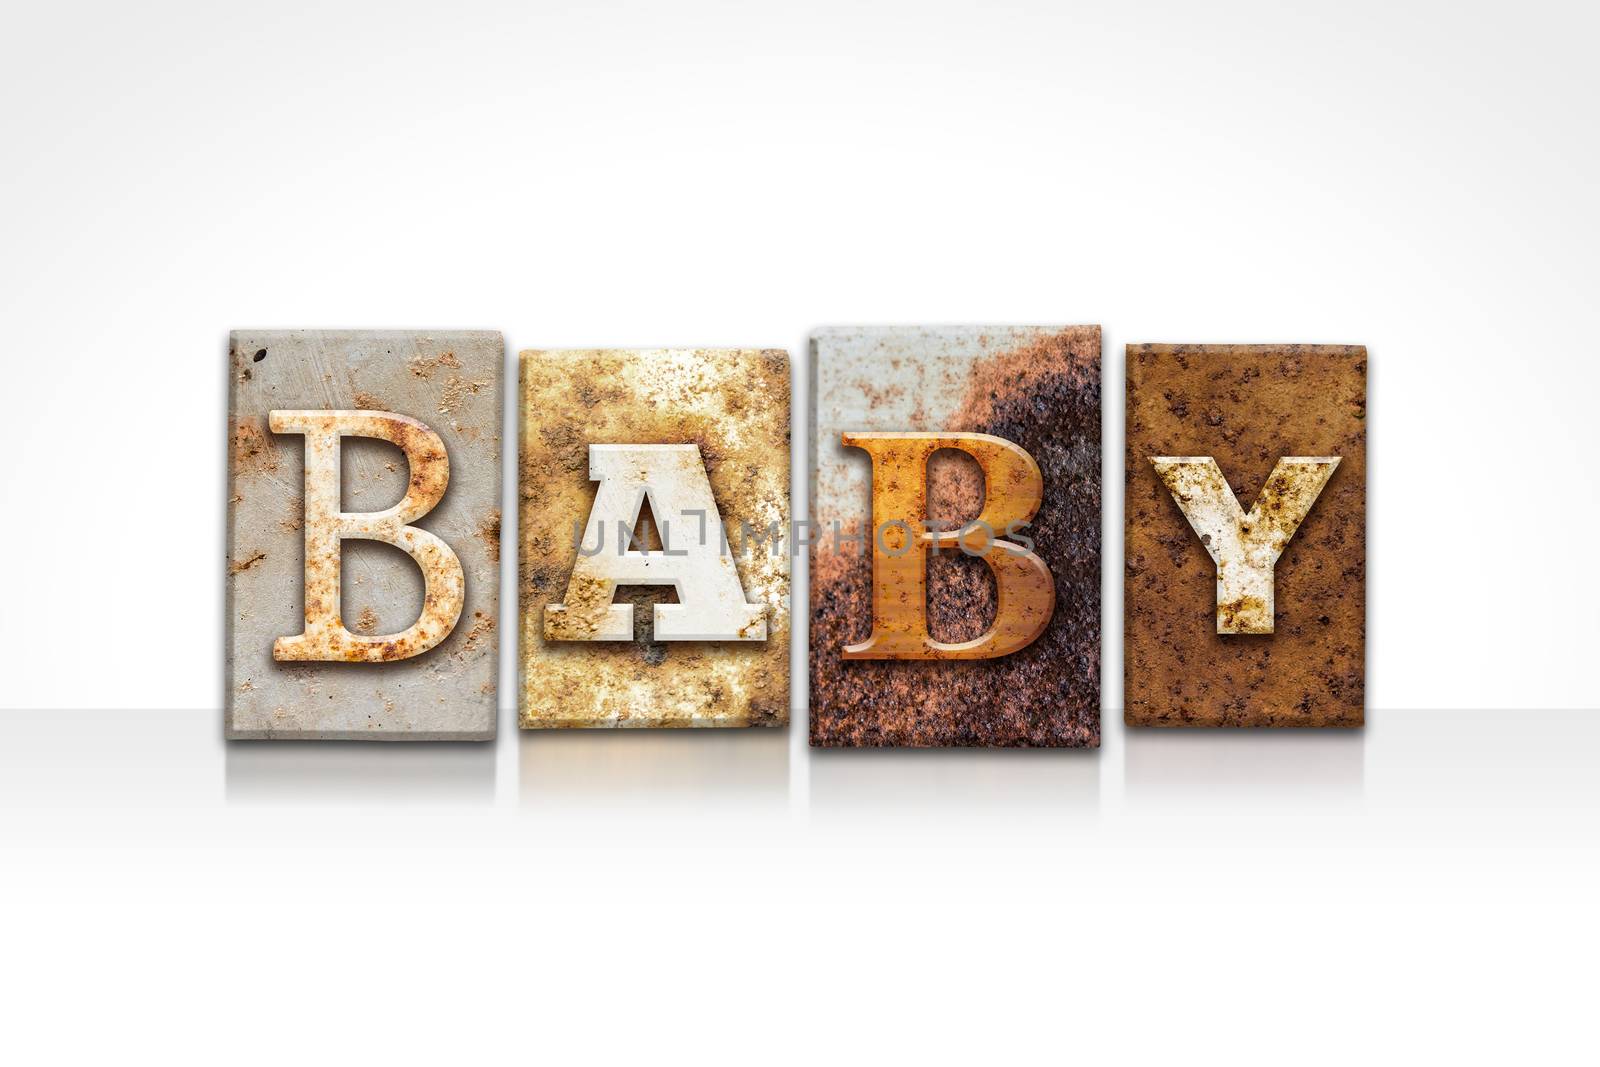 The word "BABY" written in rusty metal letterpress type isolated on a white background.